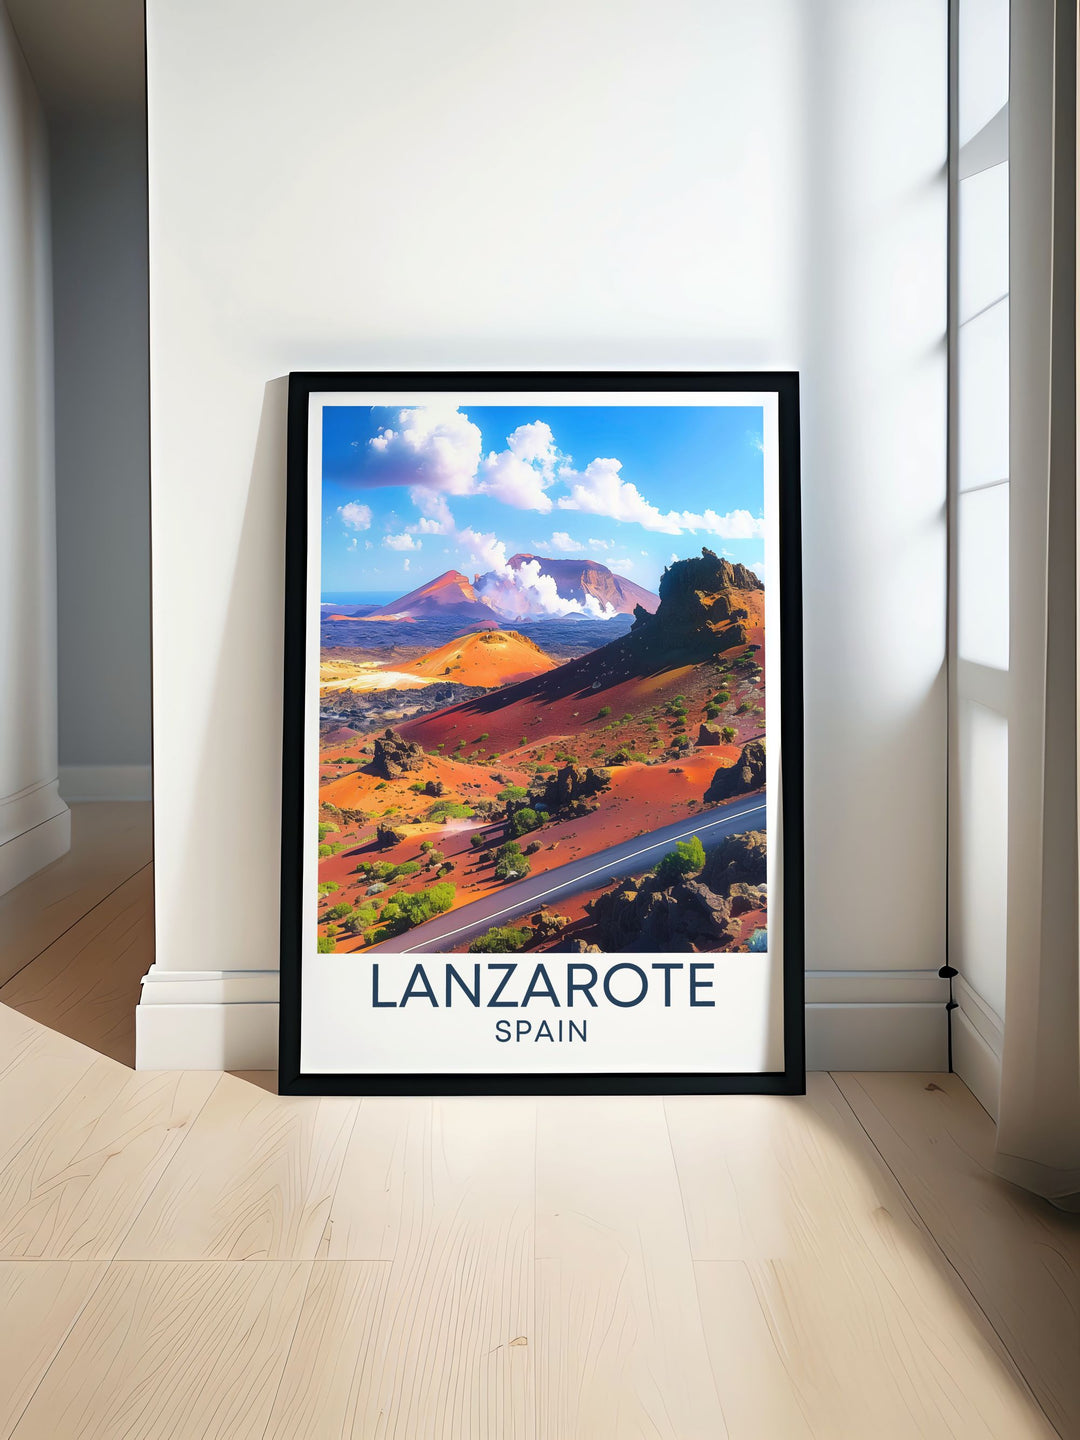 This travel poster beautifully captures the essence of Timanfaya National Park, illustrating its unique volcanic features and geothermal activity, ideal for adding a touch of Lanzarotes natural splendor to any room in your home.